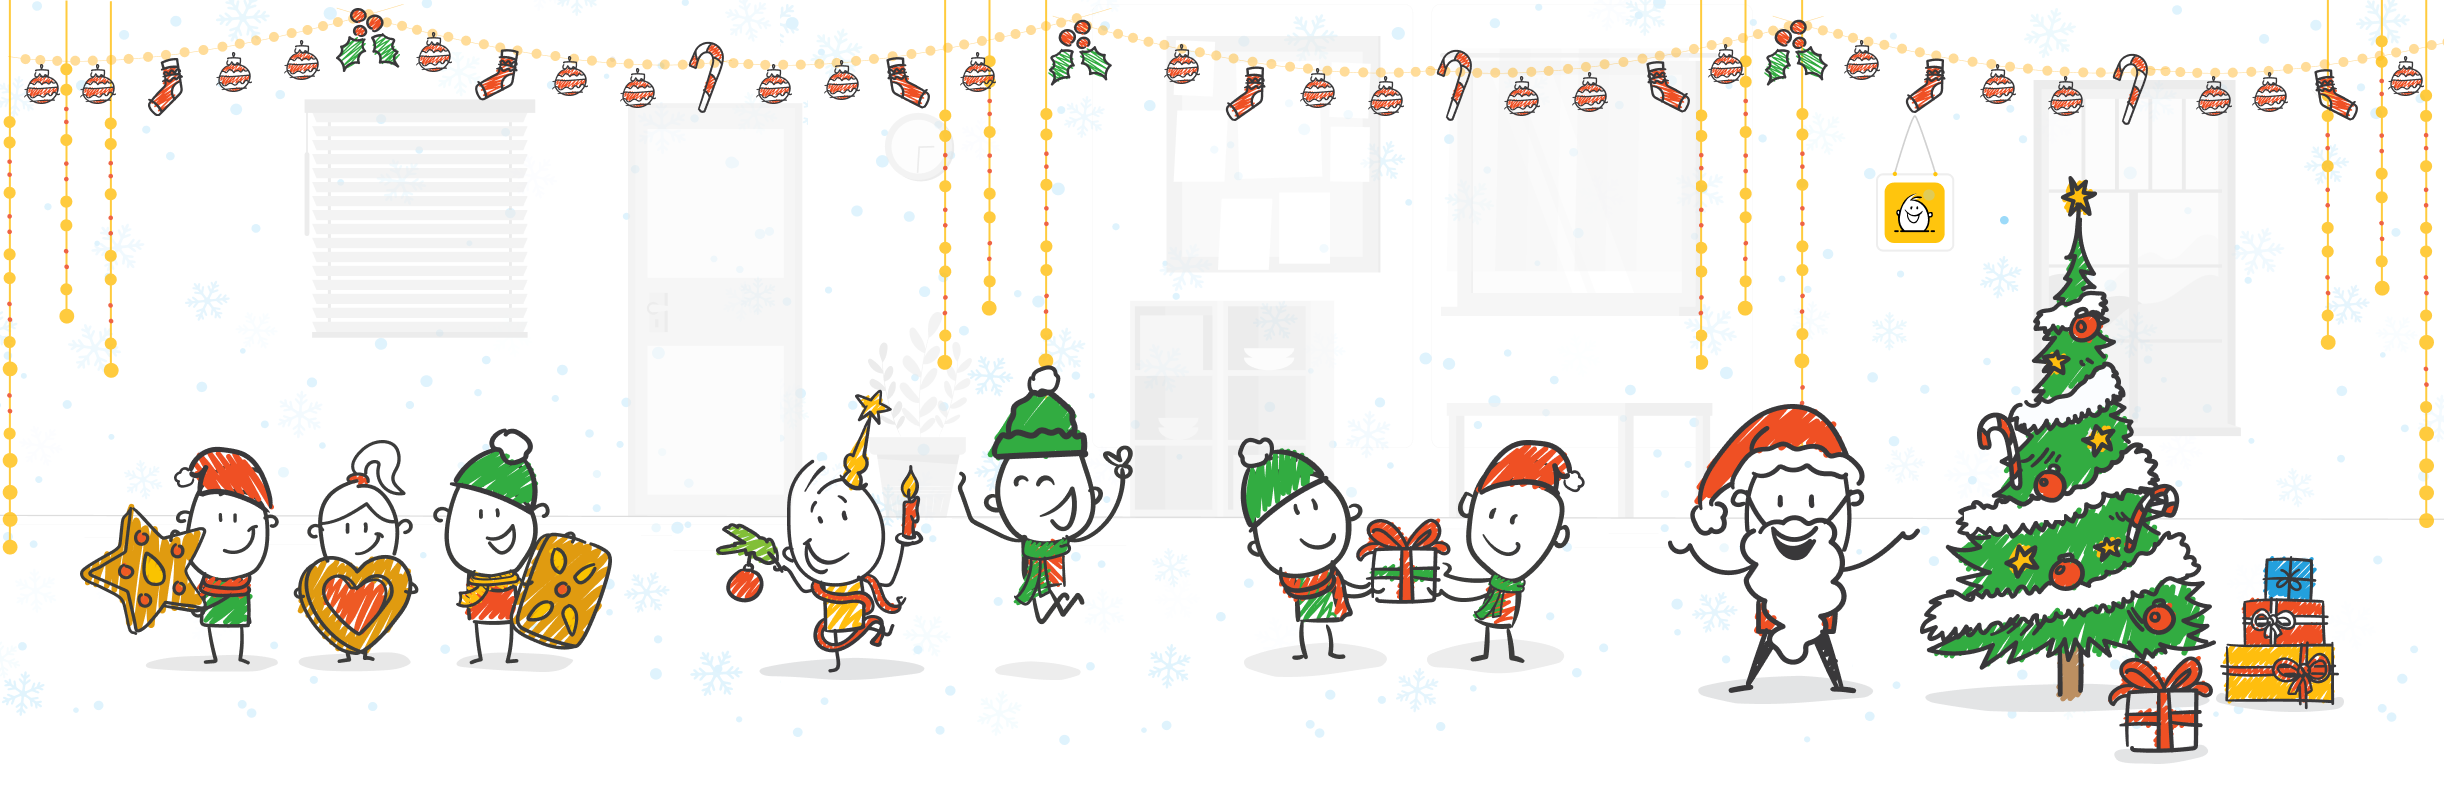 Bringing The Holiday Spirit To the Workplace Using PeerFives